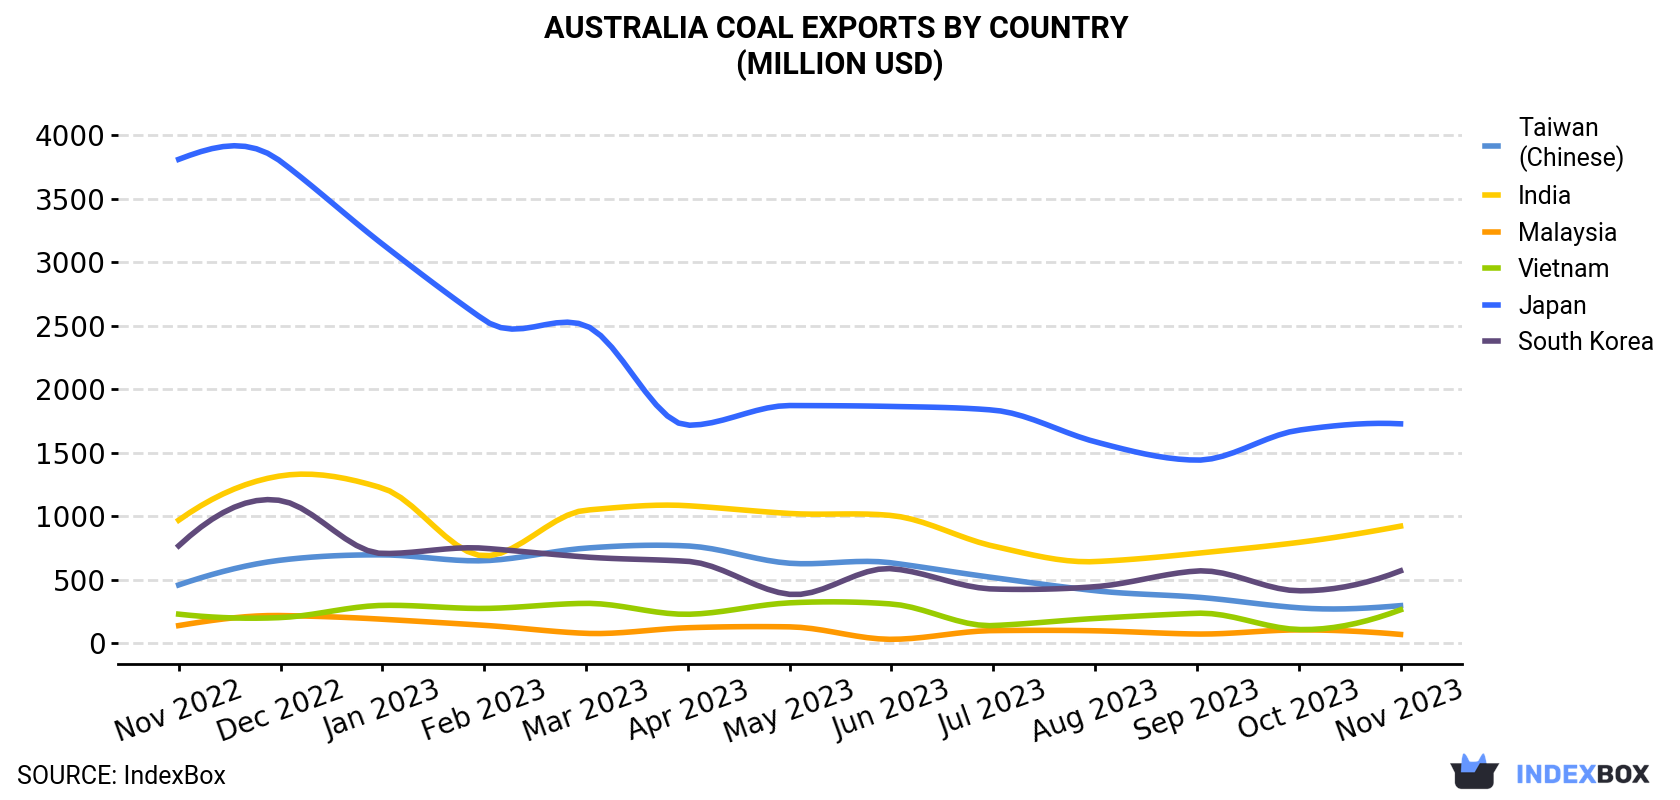 Australia Coal Exports By Country (Million USD)